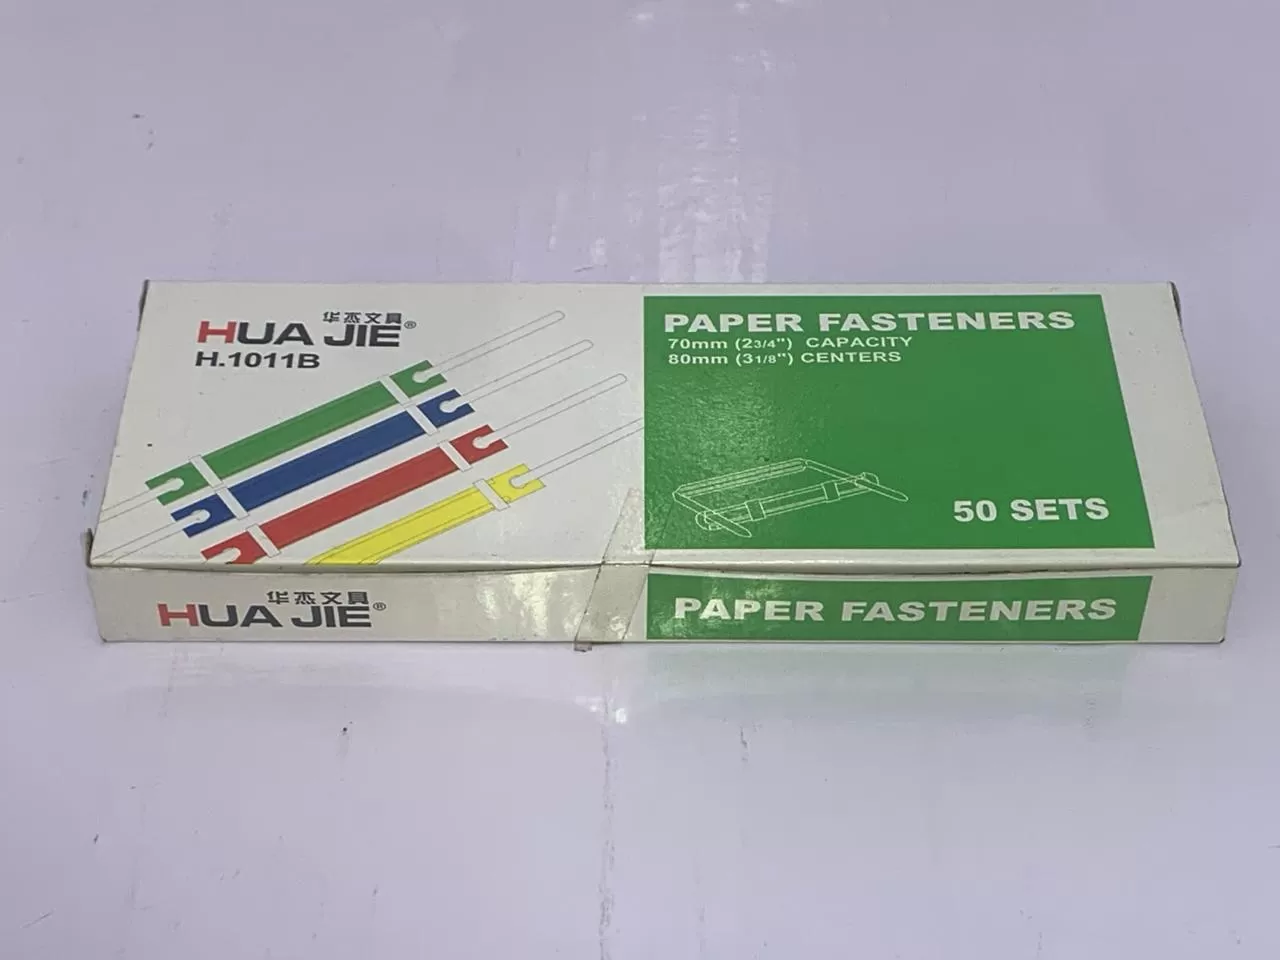 PAPER FASTENERS  CAPACITY 70MM & CENTERS 80MM  50PC PACK